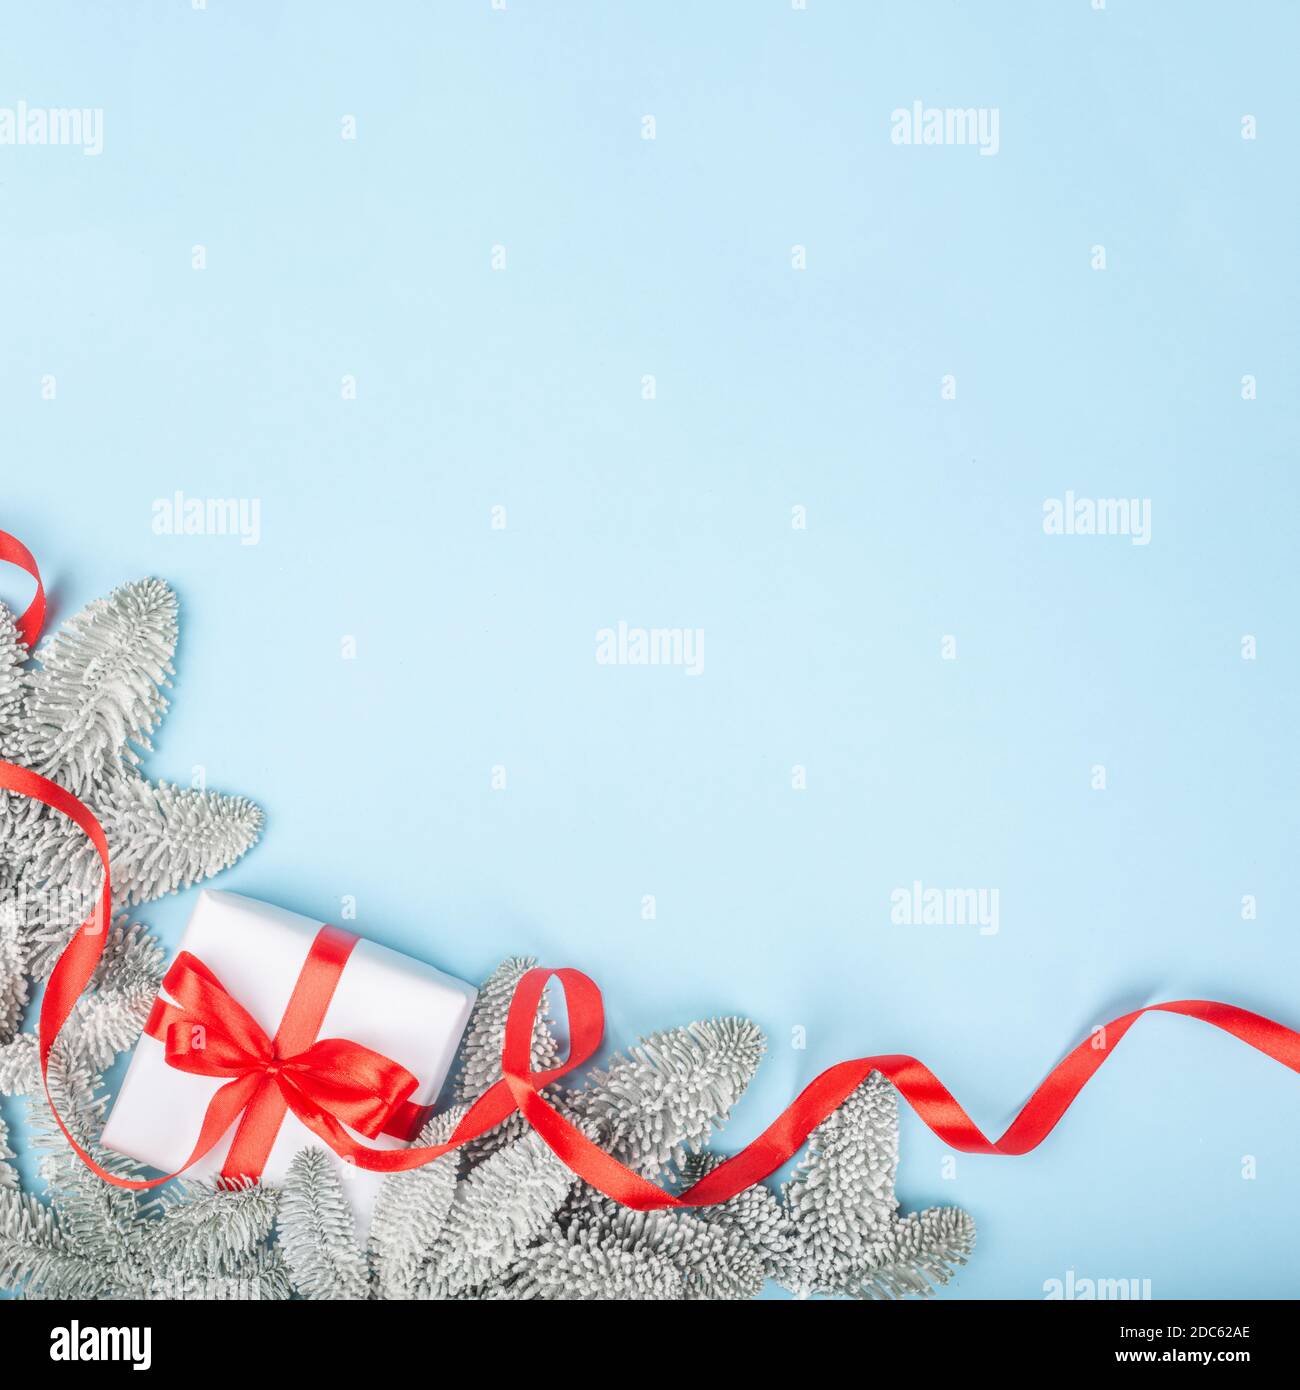 Frosted fir tree twigs and Christmas decorative gift with red ribbon on blue background with copy space for text template flat lay top view design Stock Photo